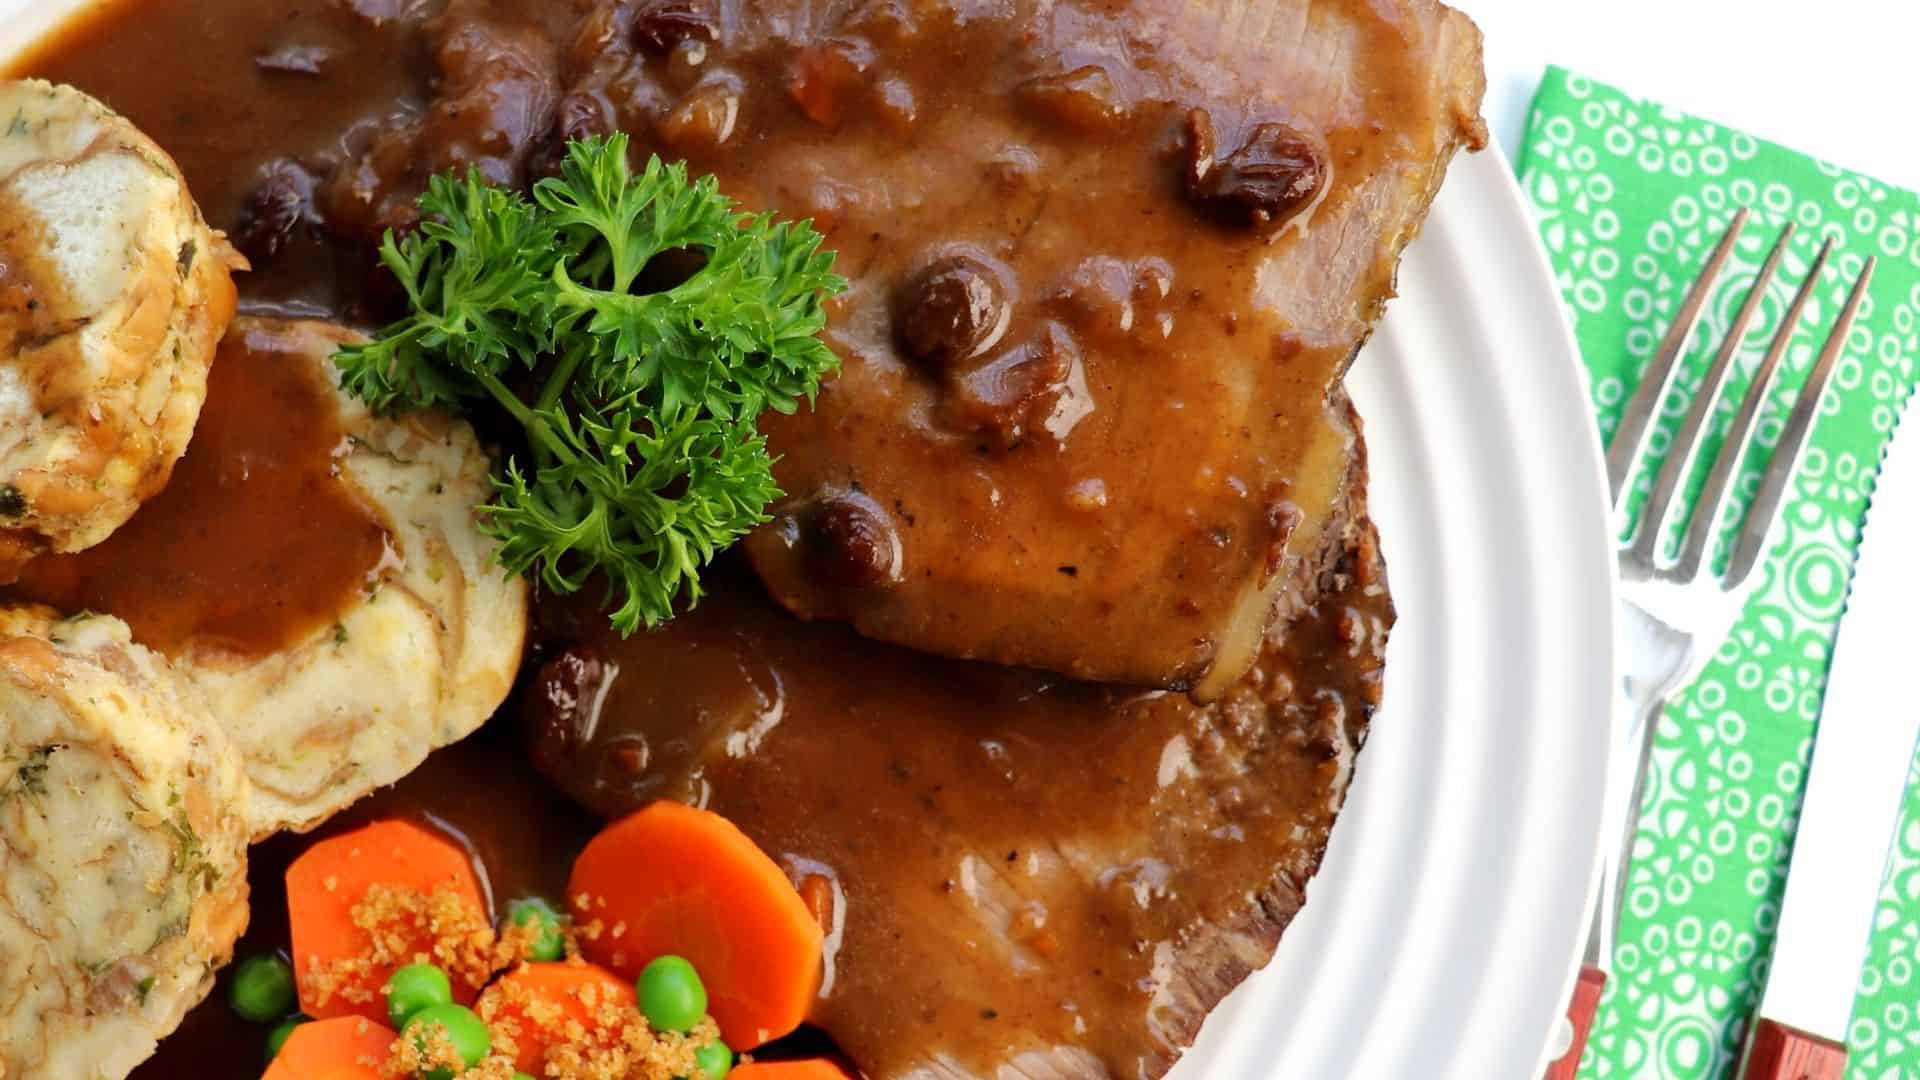 Rhenish Sauerbraten Meal With Carrots And Peas Wallpaper